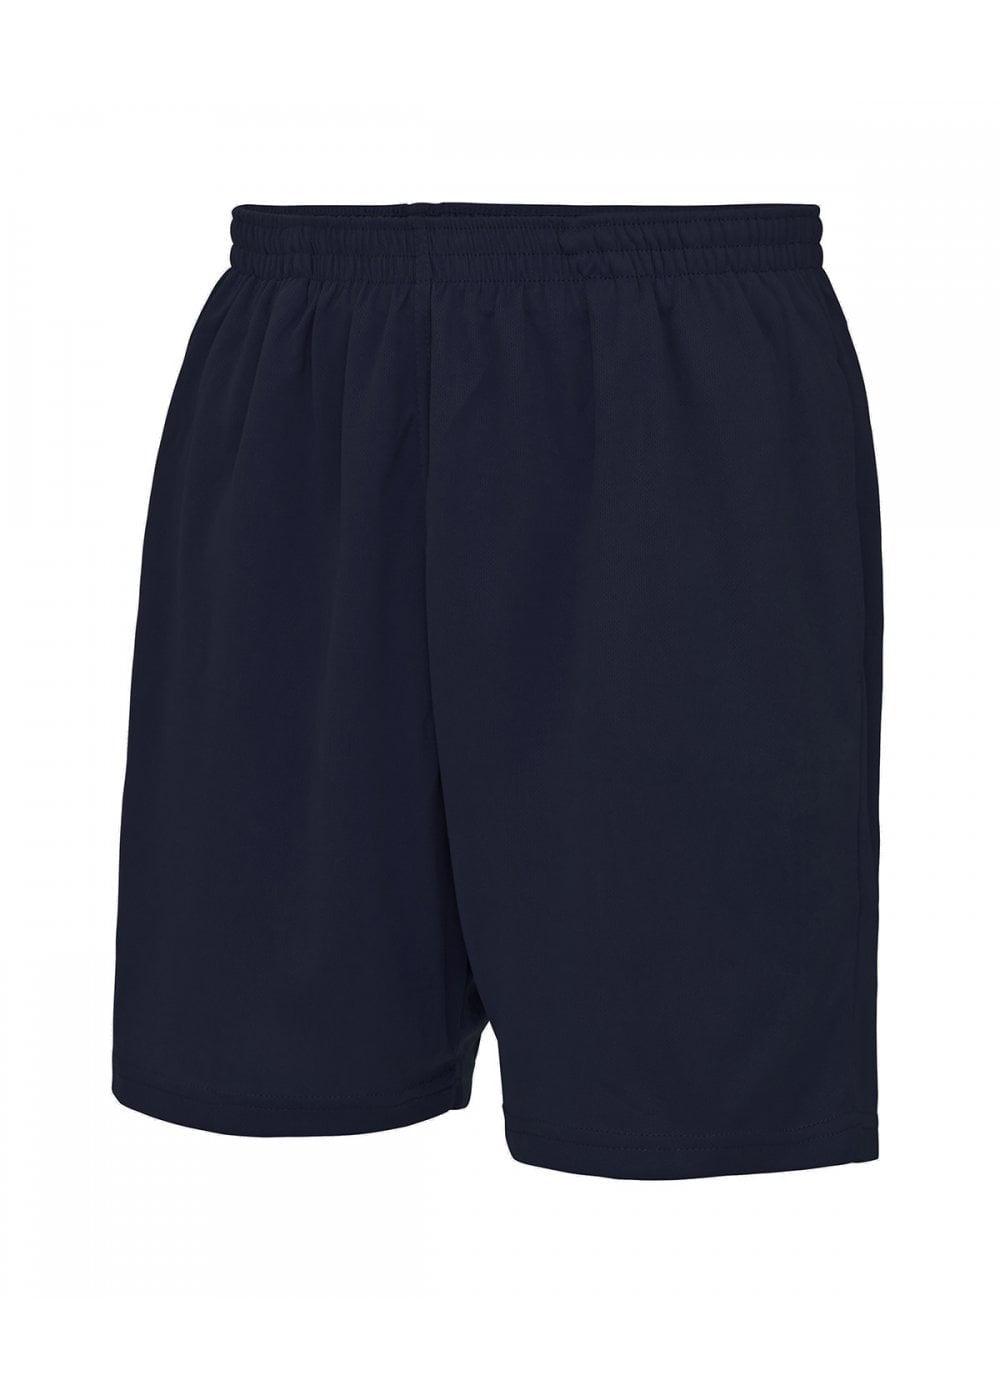 AWDis Cool Mesh Lined Mens Swimming Shorts - French Navy-Bruntsfield Sports Online